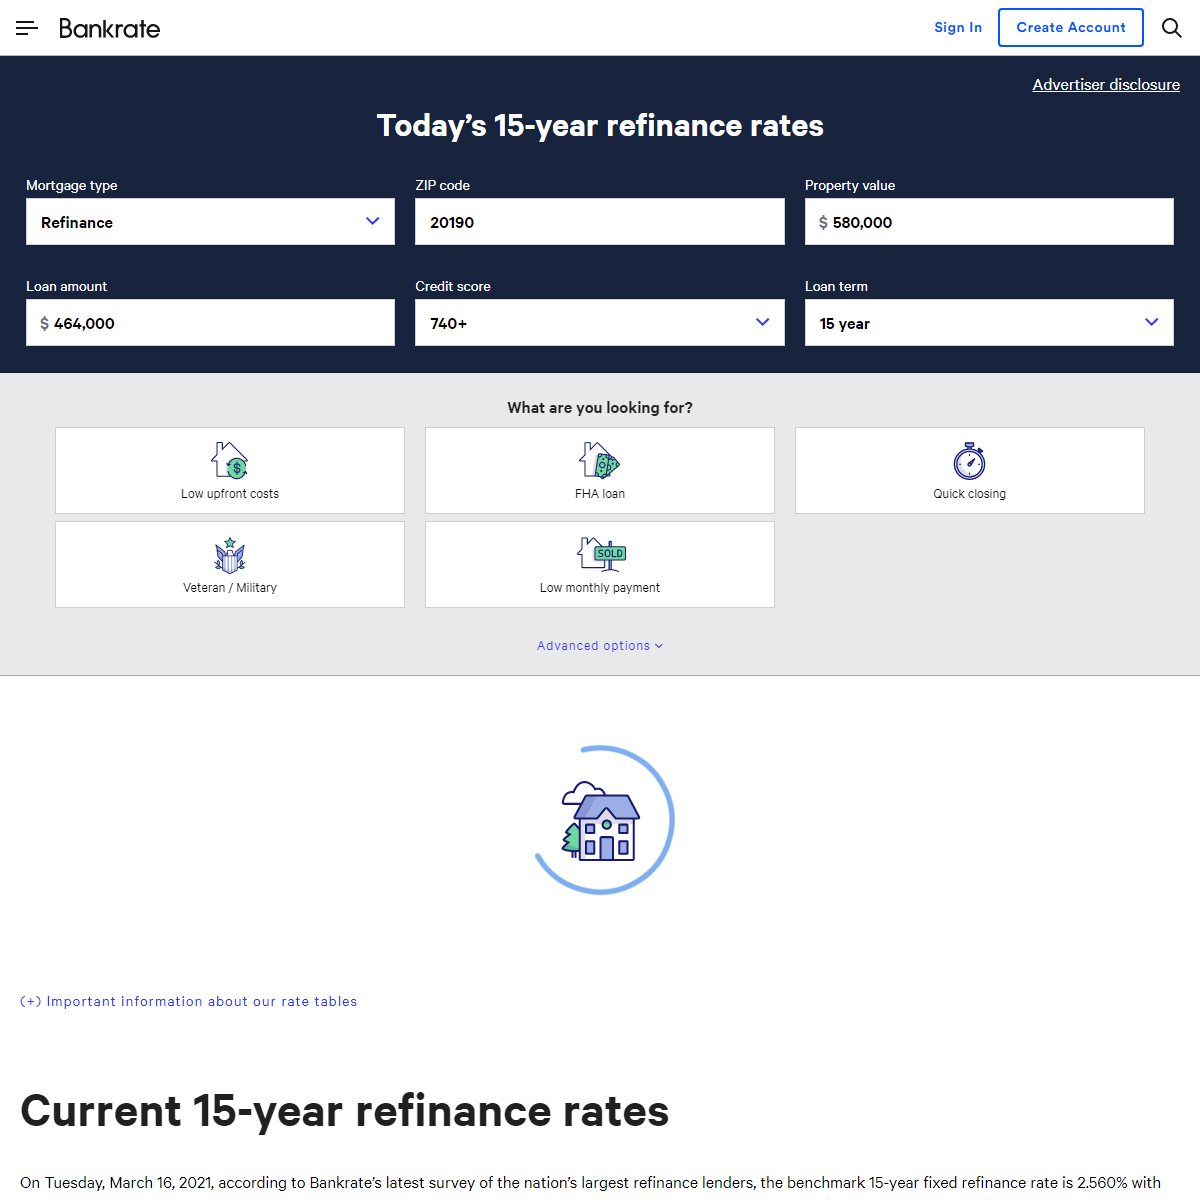 A complete backup of https://www.bankrate.com/mortgages/15-year-refinance-rates/